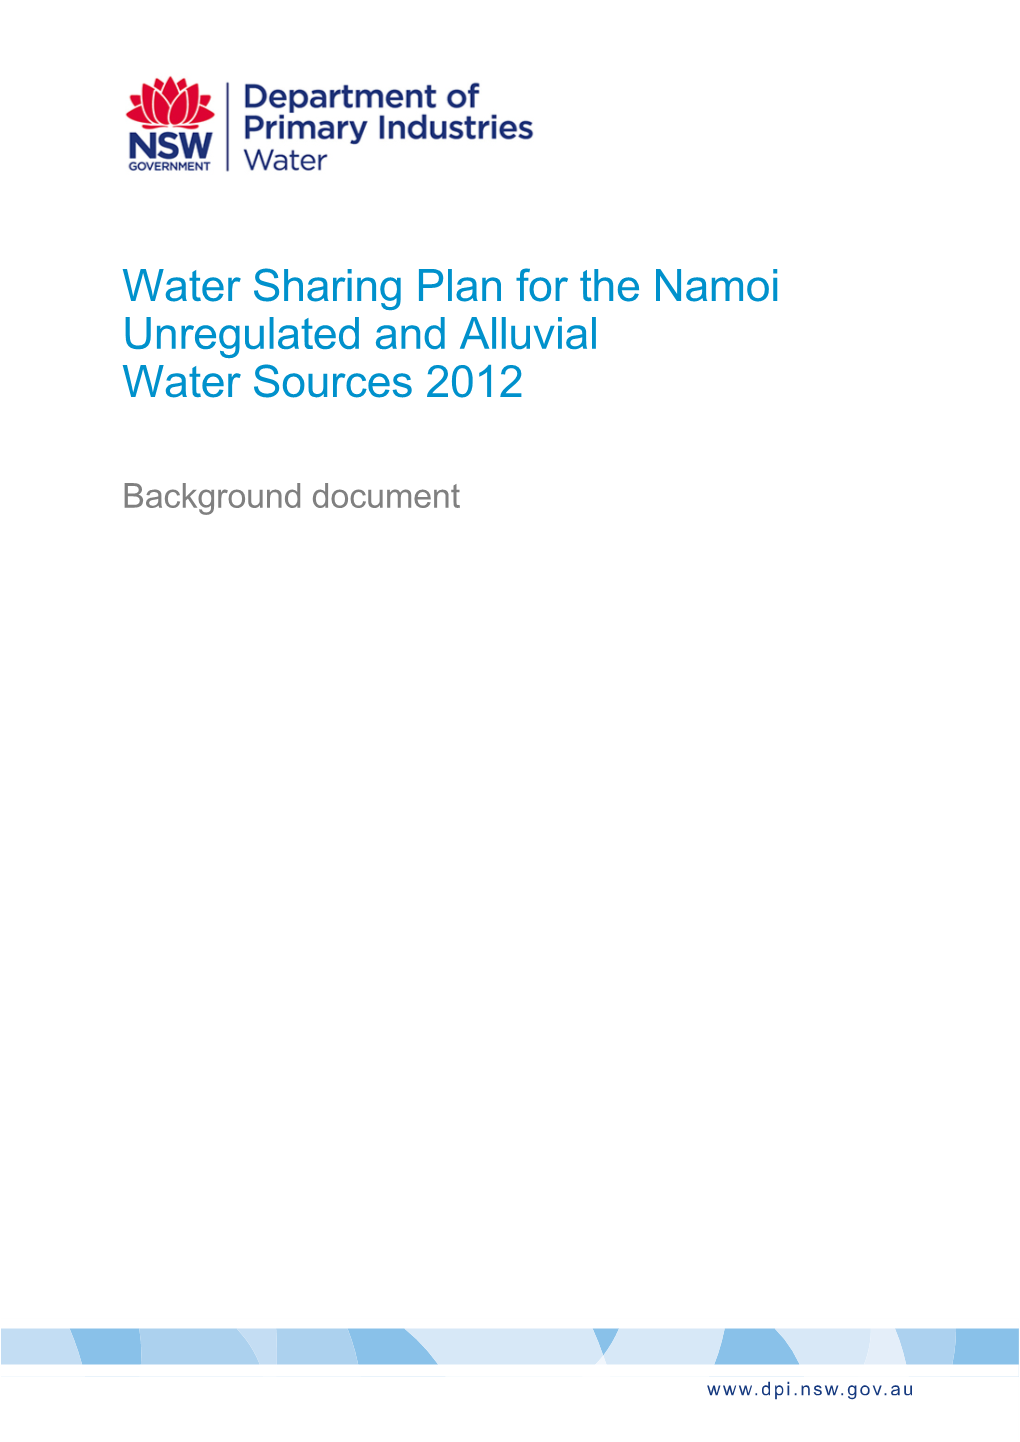 Water Sources 2012